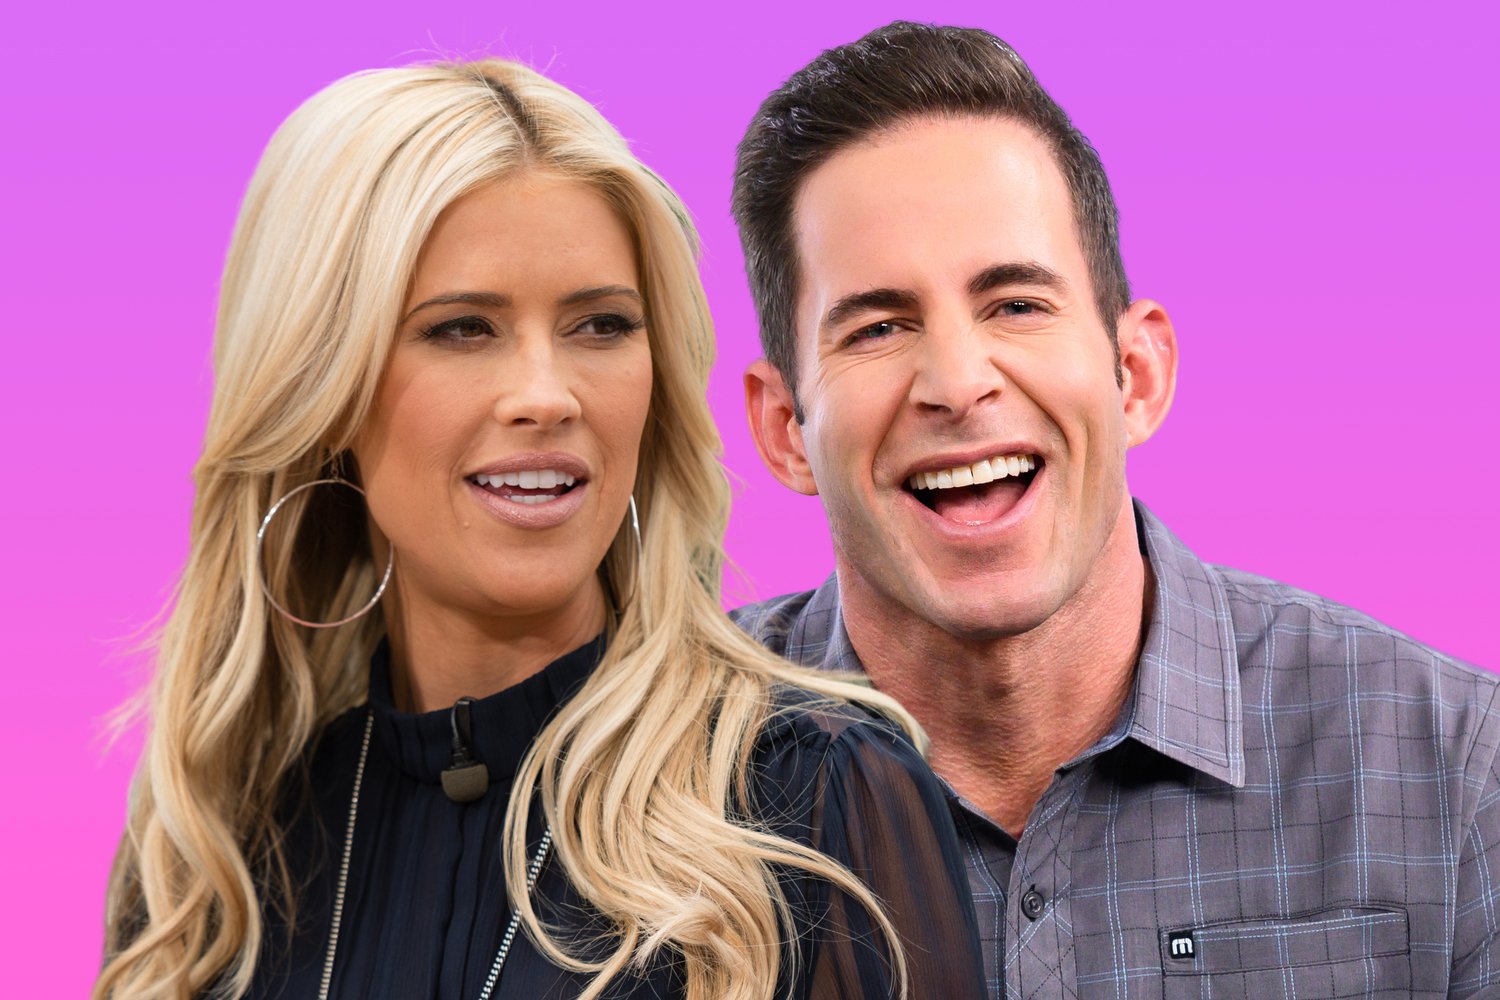 Christina Haack wearing hoop earrings and a sheer top and Tarek El Moussa smiling wearing a button up shirt in gray